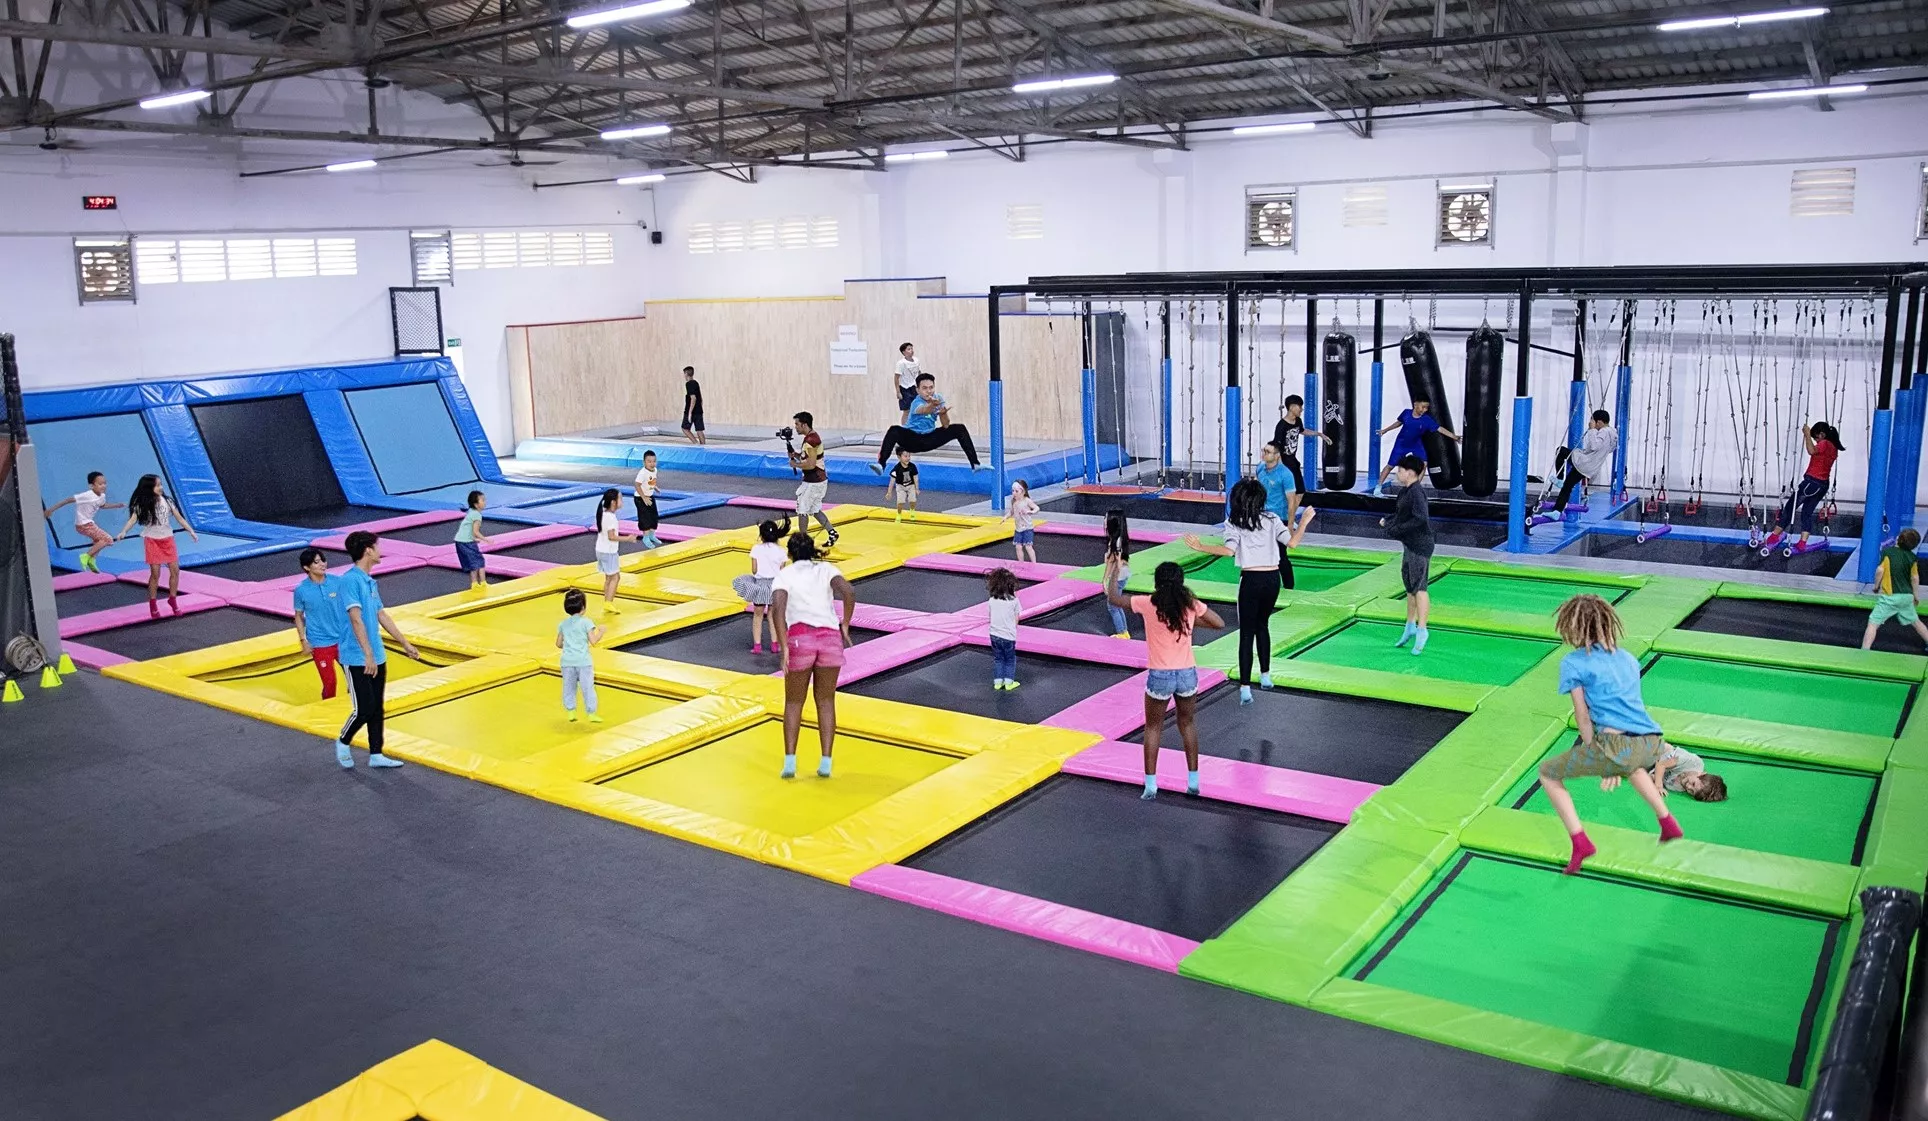 Fly Phnom Penh in Cambodia, East Asia | Trampolining - Rated 3.9